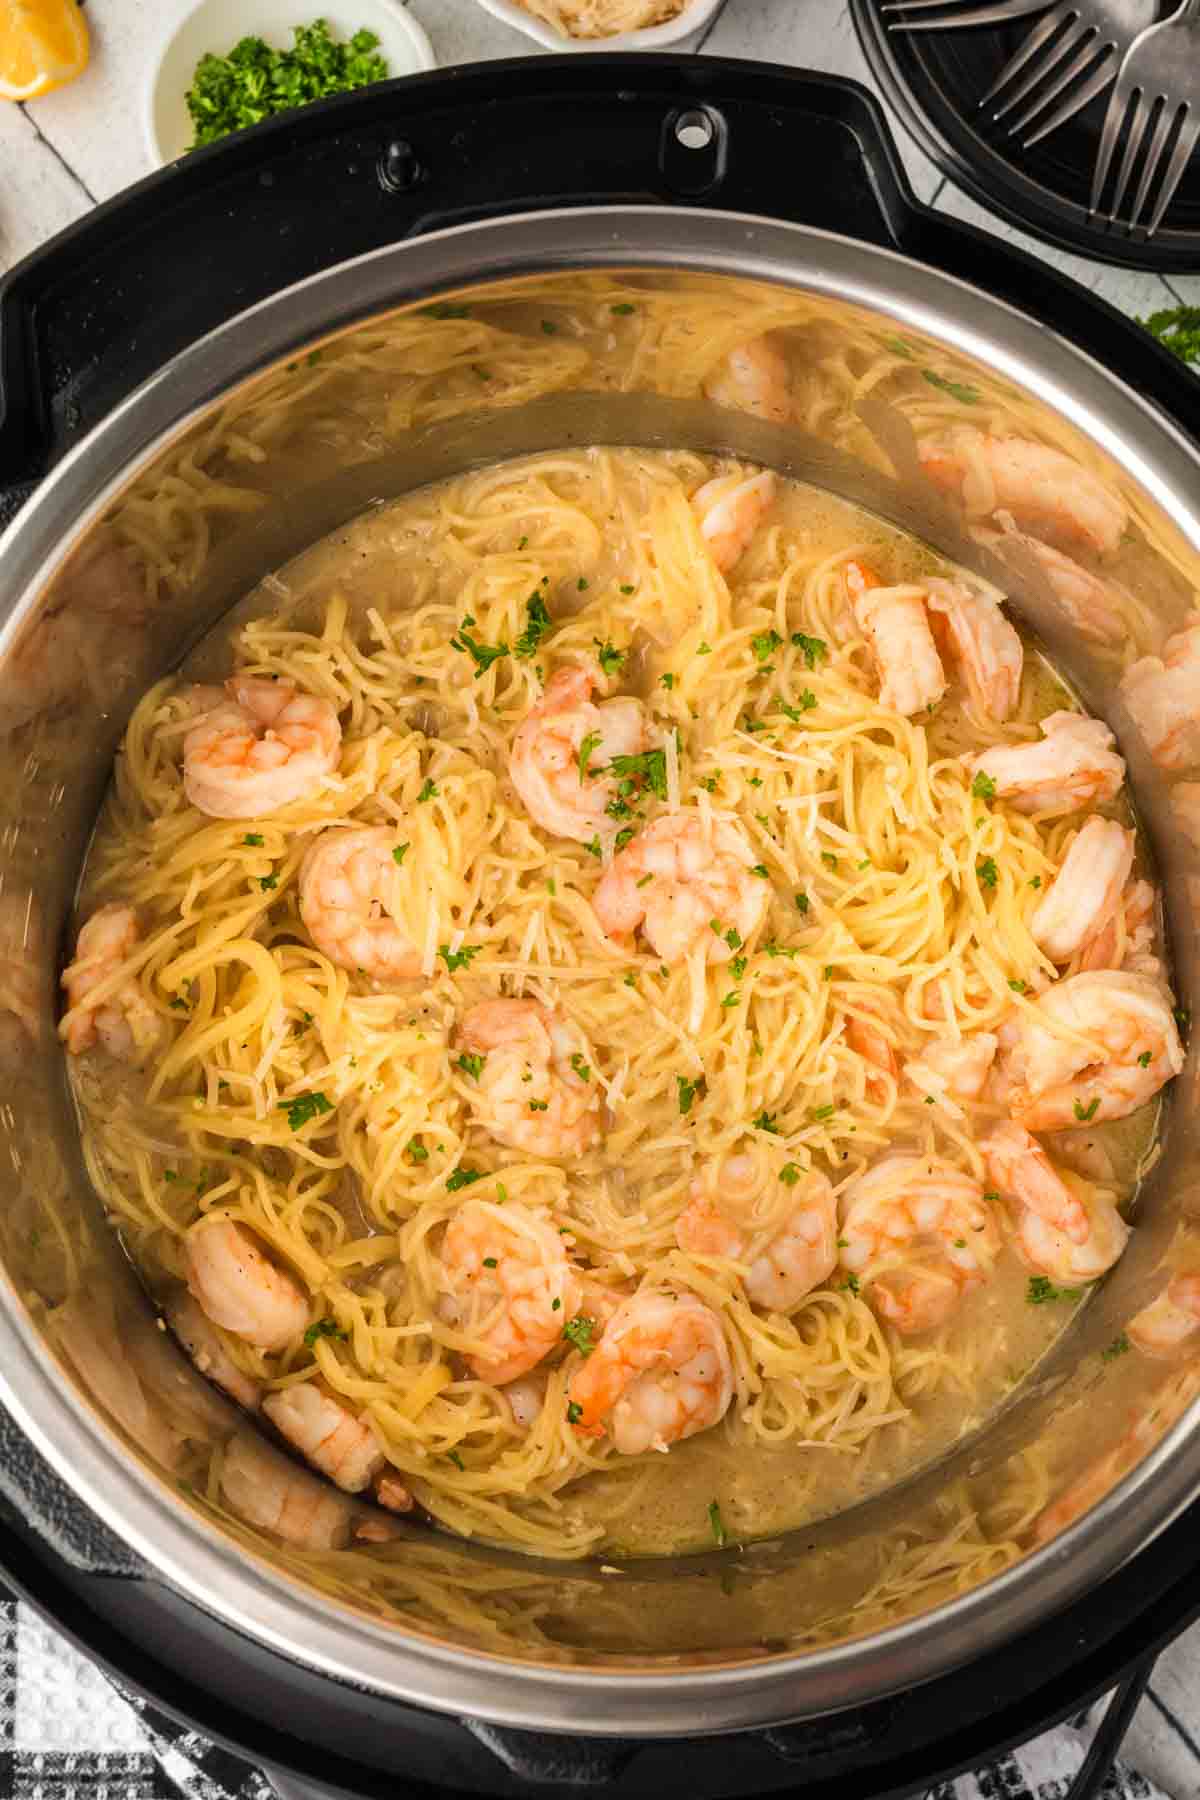 Shrimp scampi with noodles in the instant pot